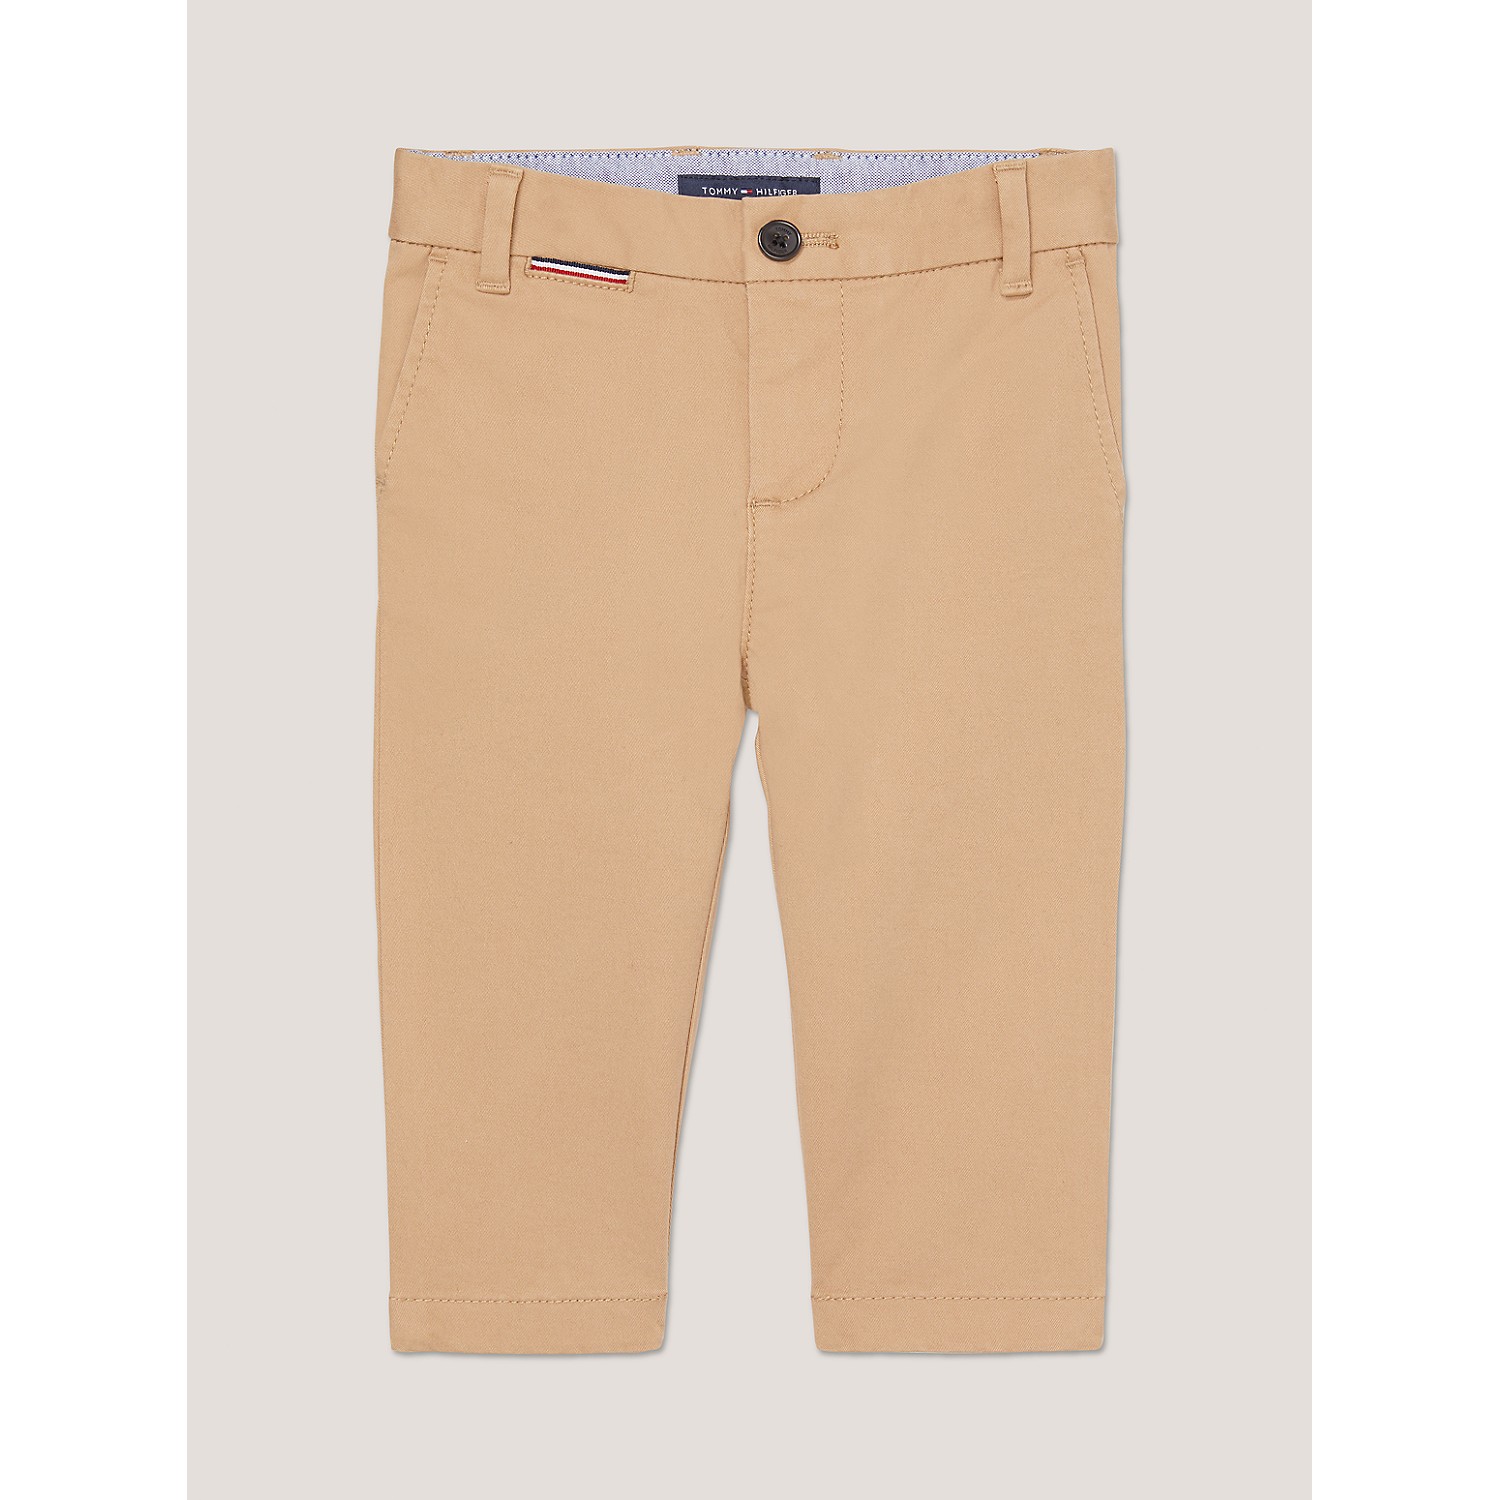 TOMMY HILFIGER Babies Solid Stretch Chino